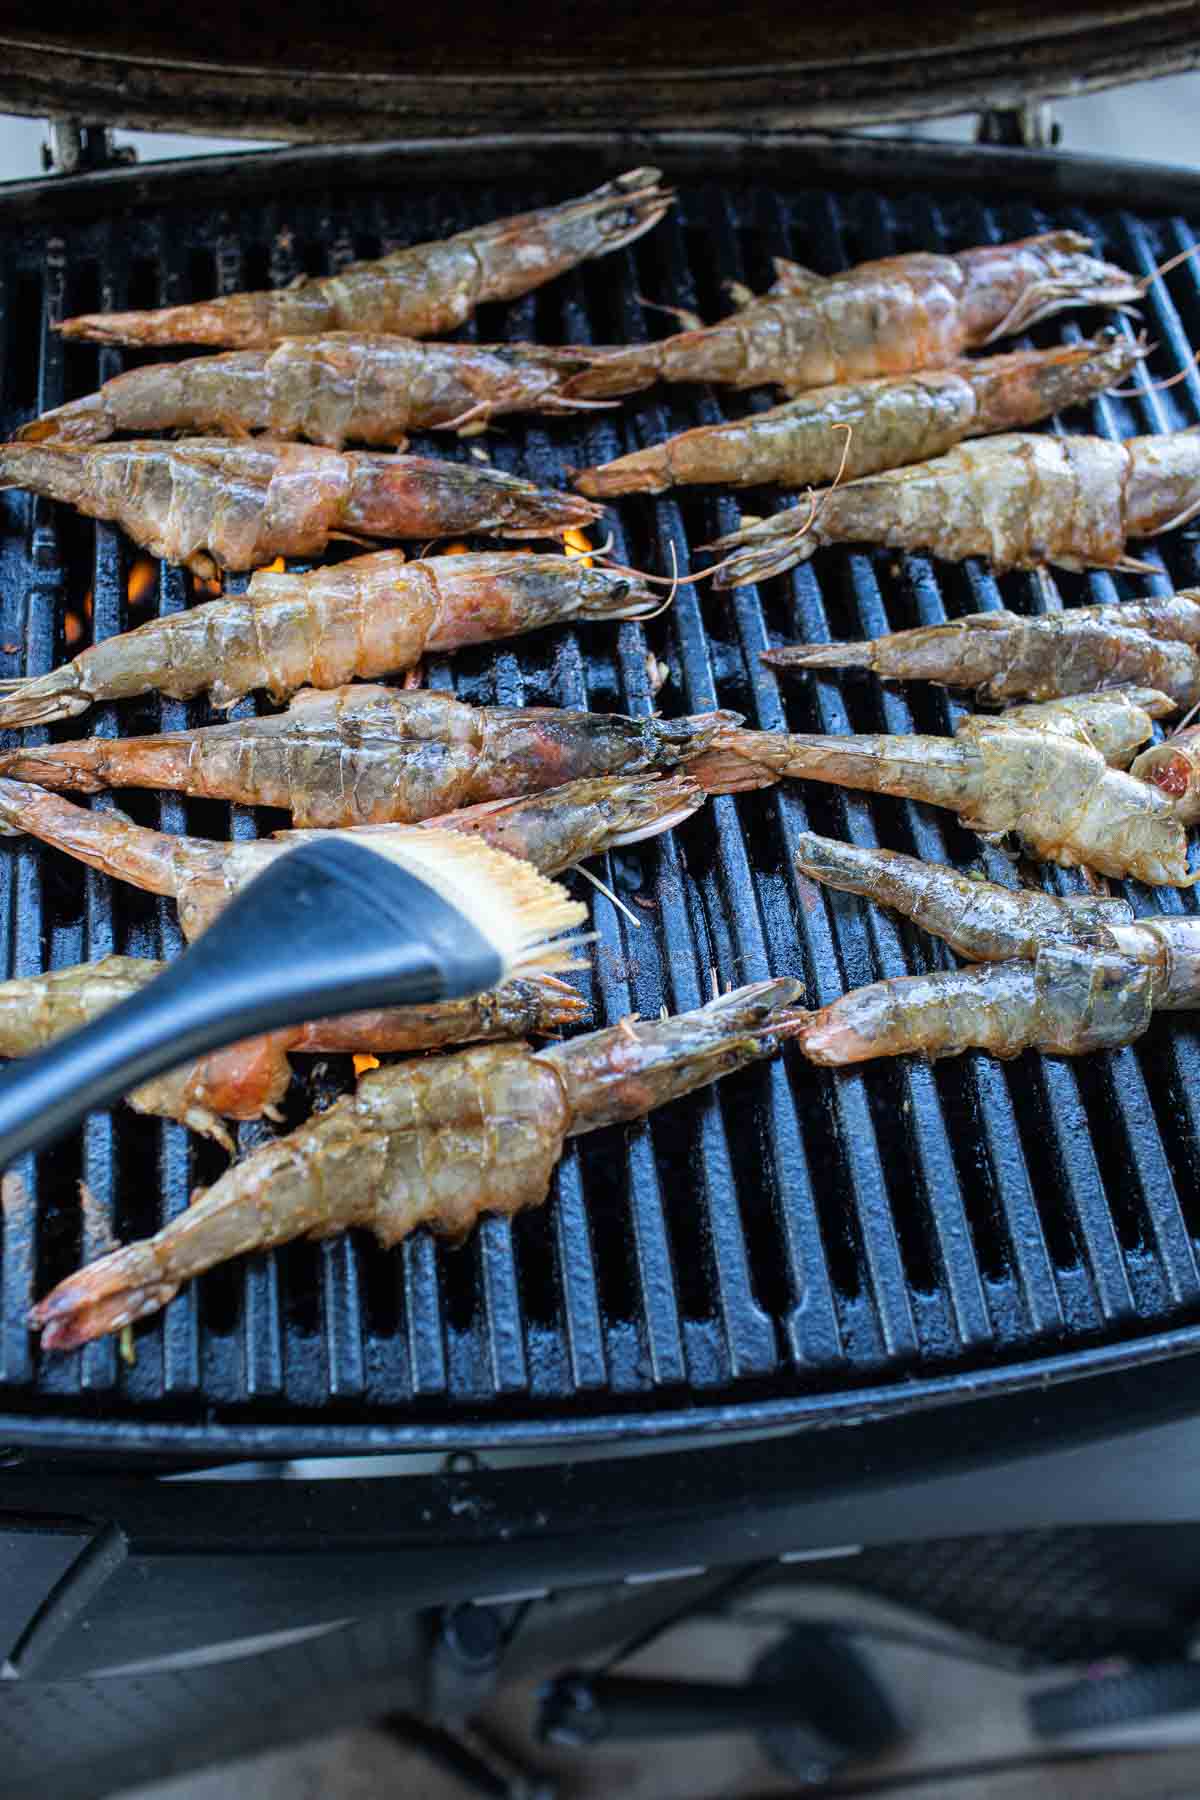 Grilled prawn on the grill.